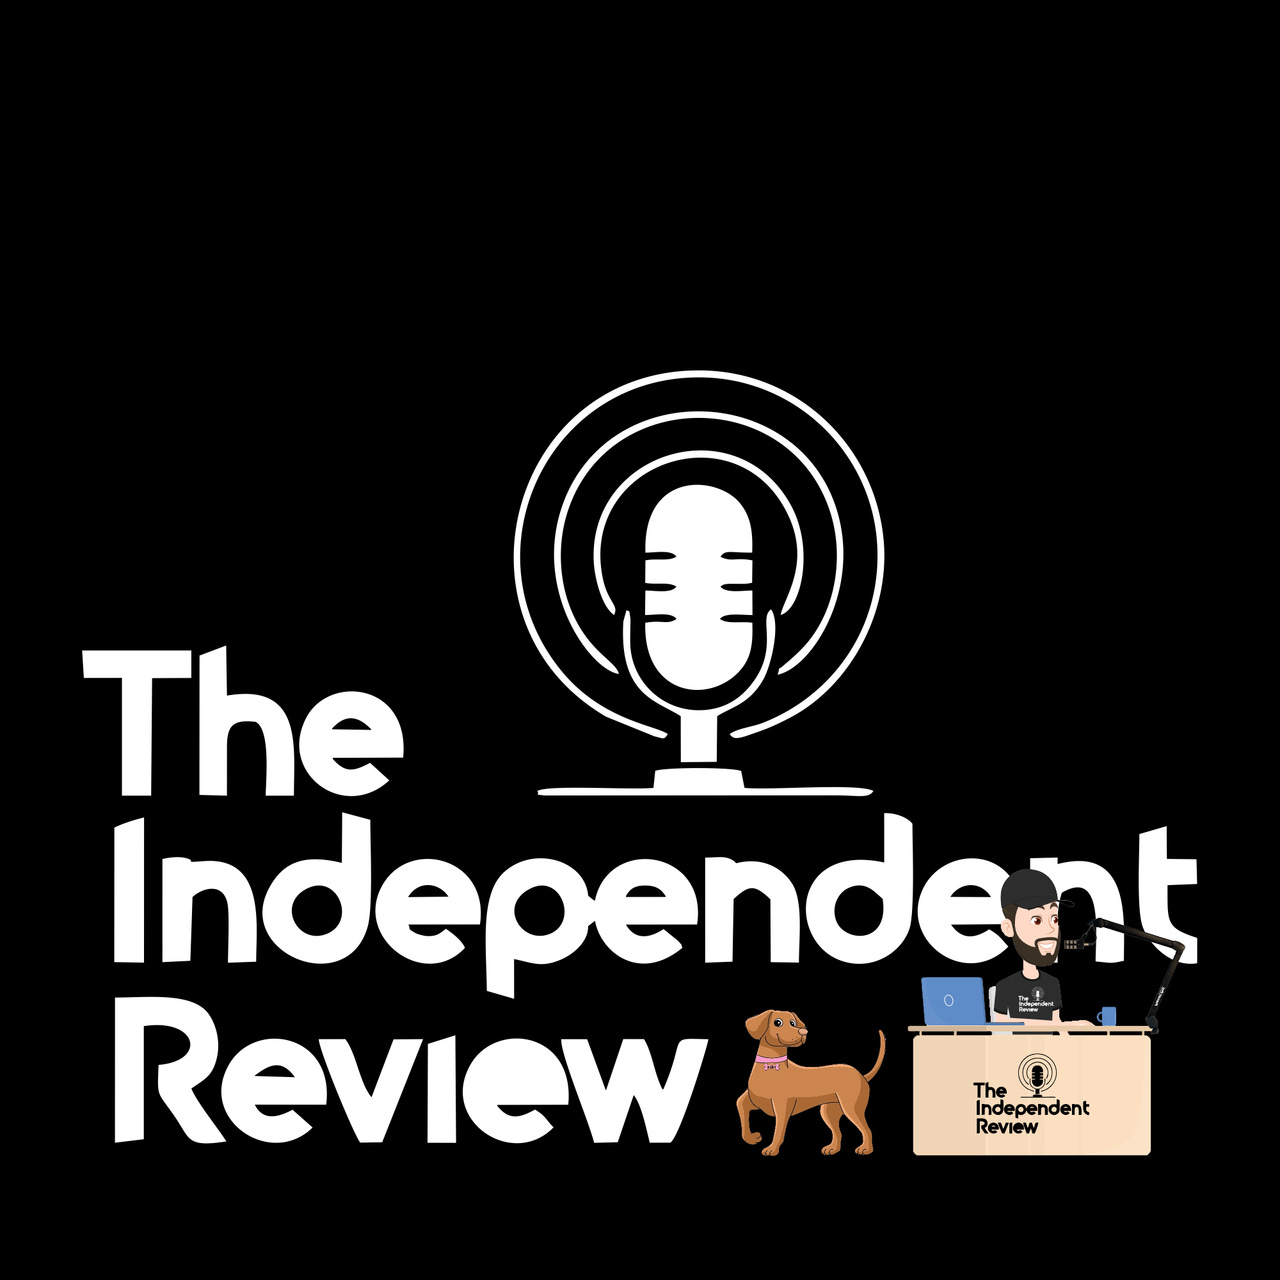 Artwork for The Independent Review